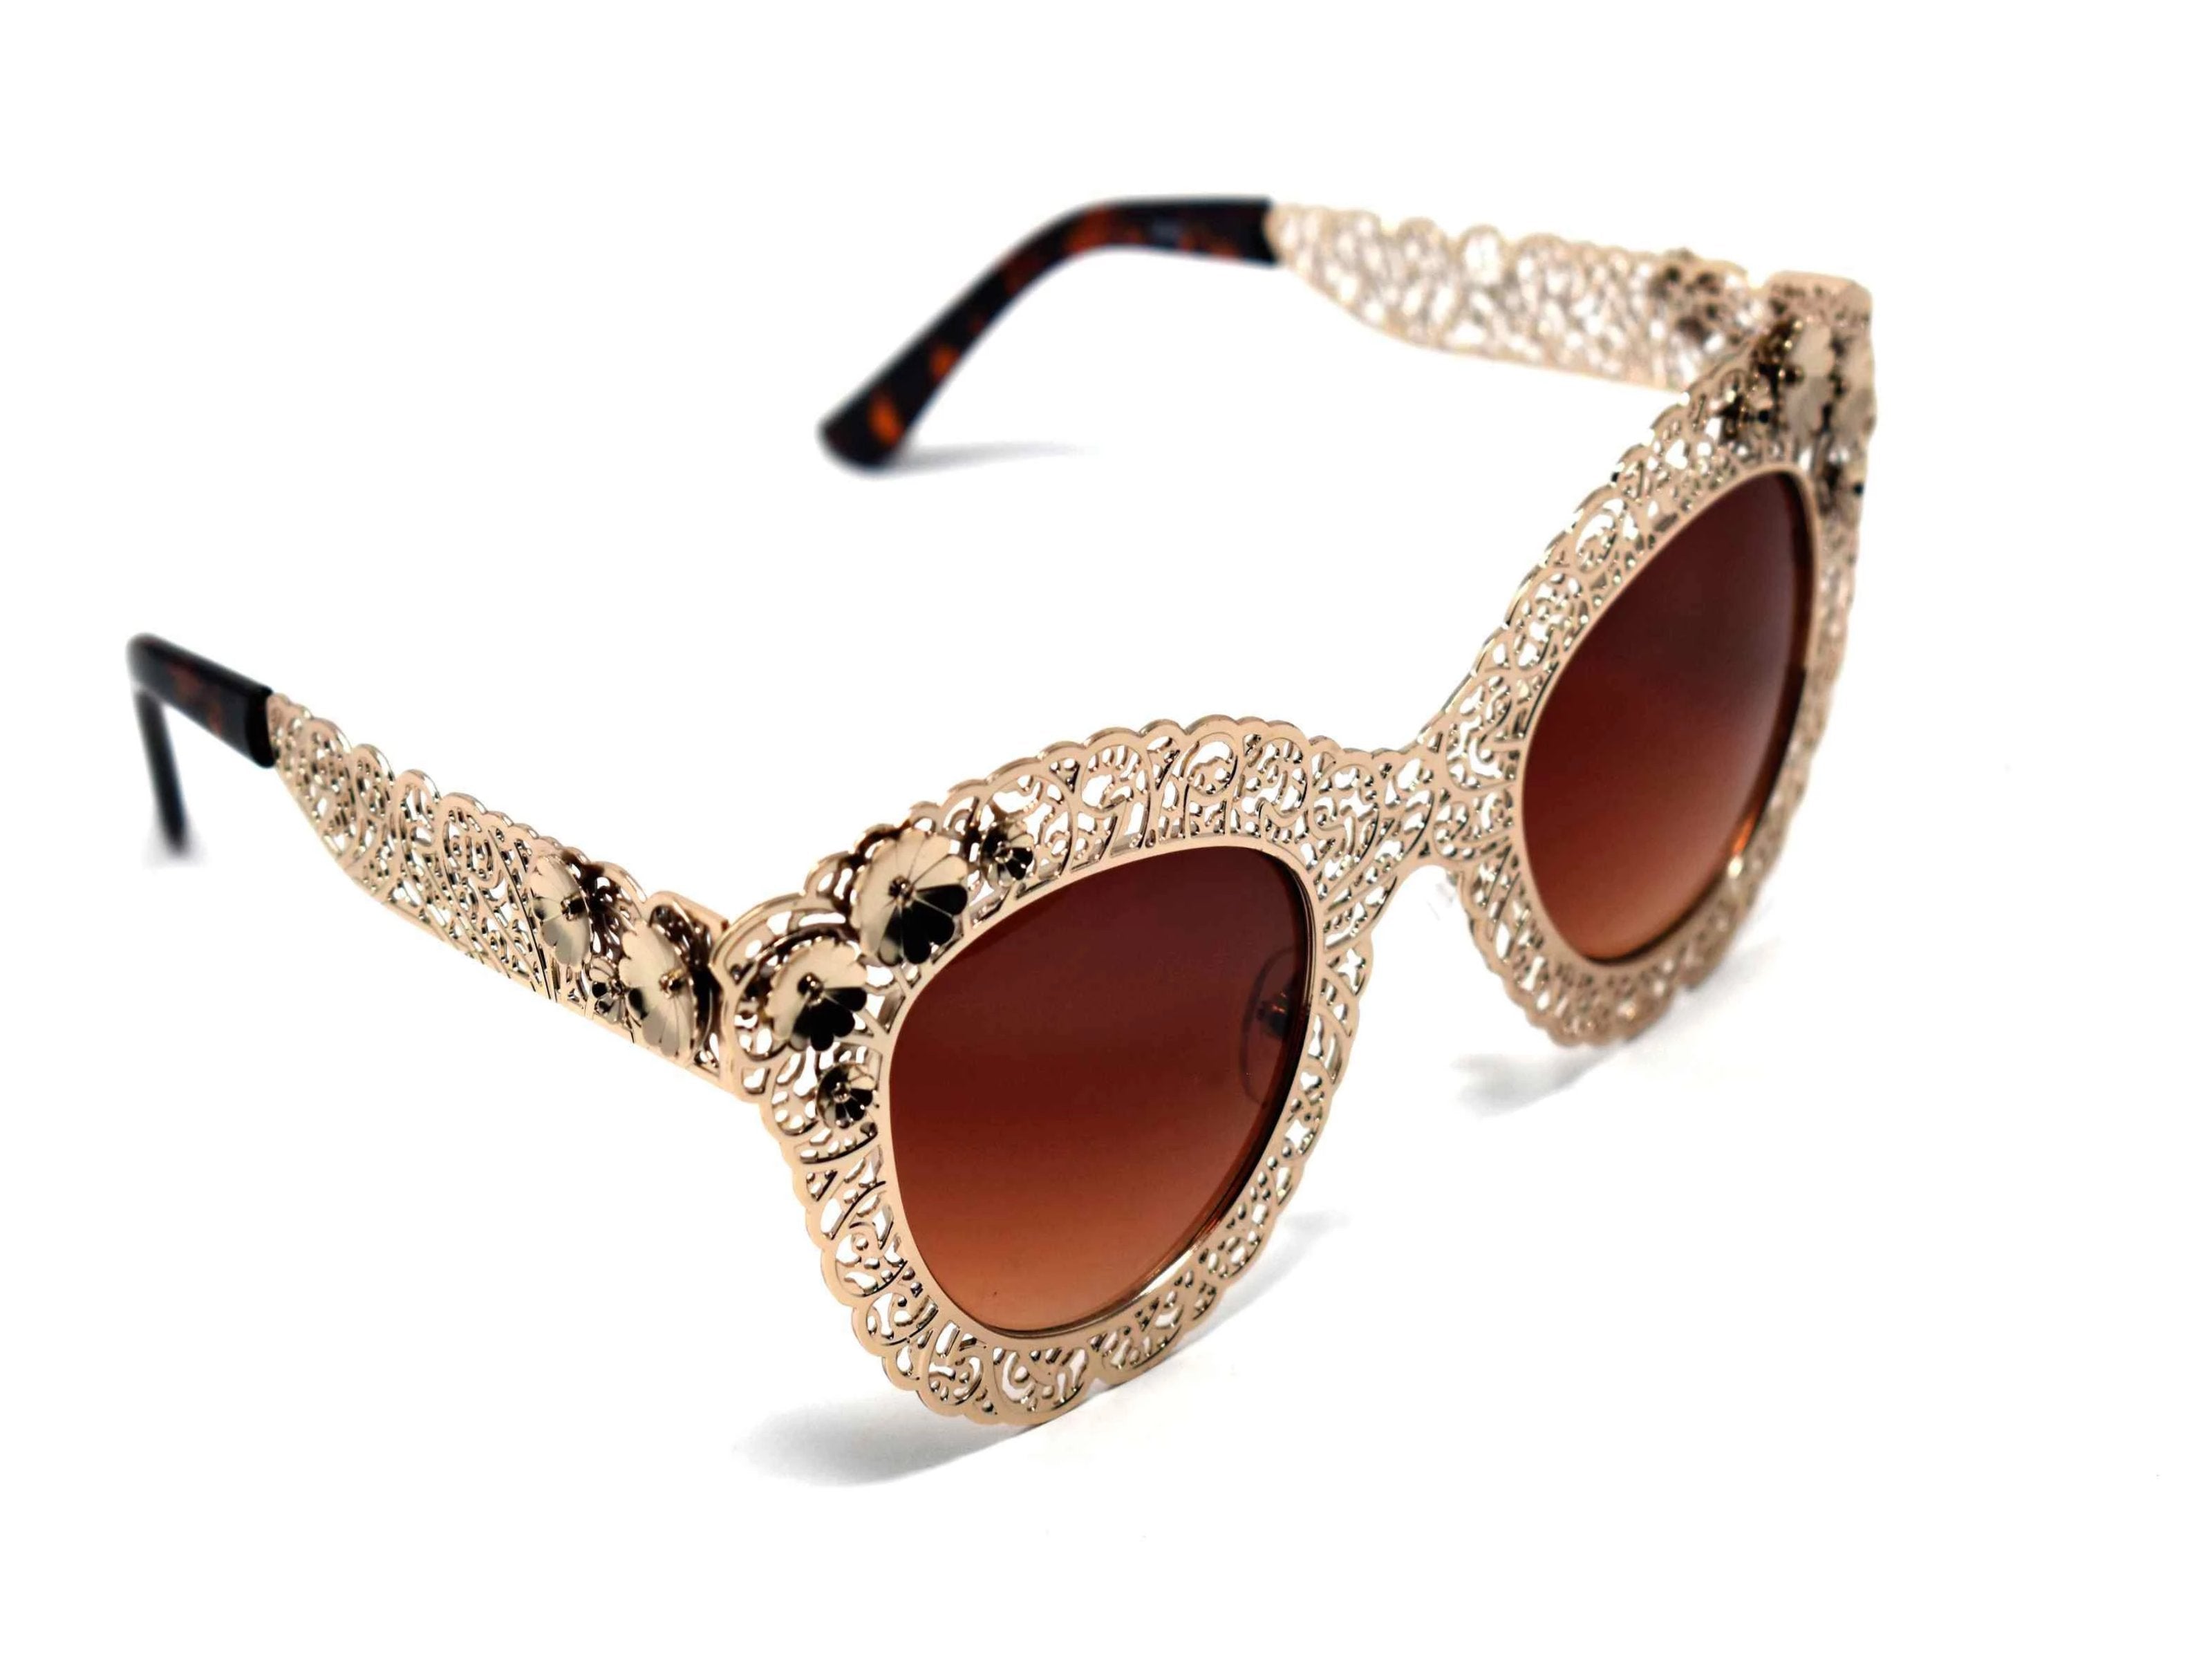 Both dainty and daring be bold in our Cardinal rose gold metal frame sunglasses with brown lens.